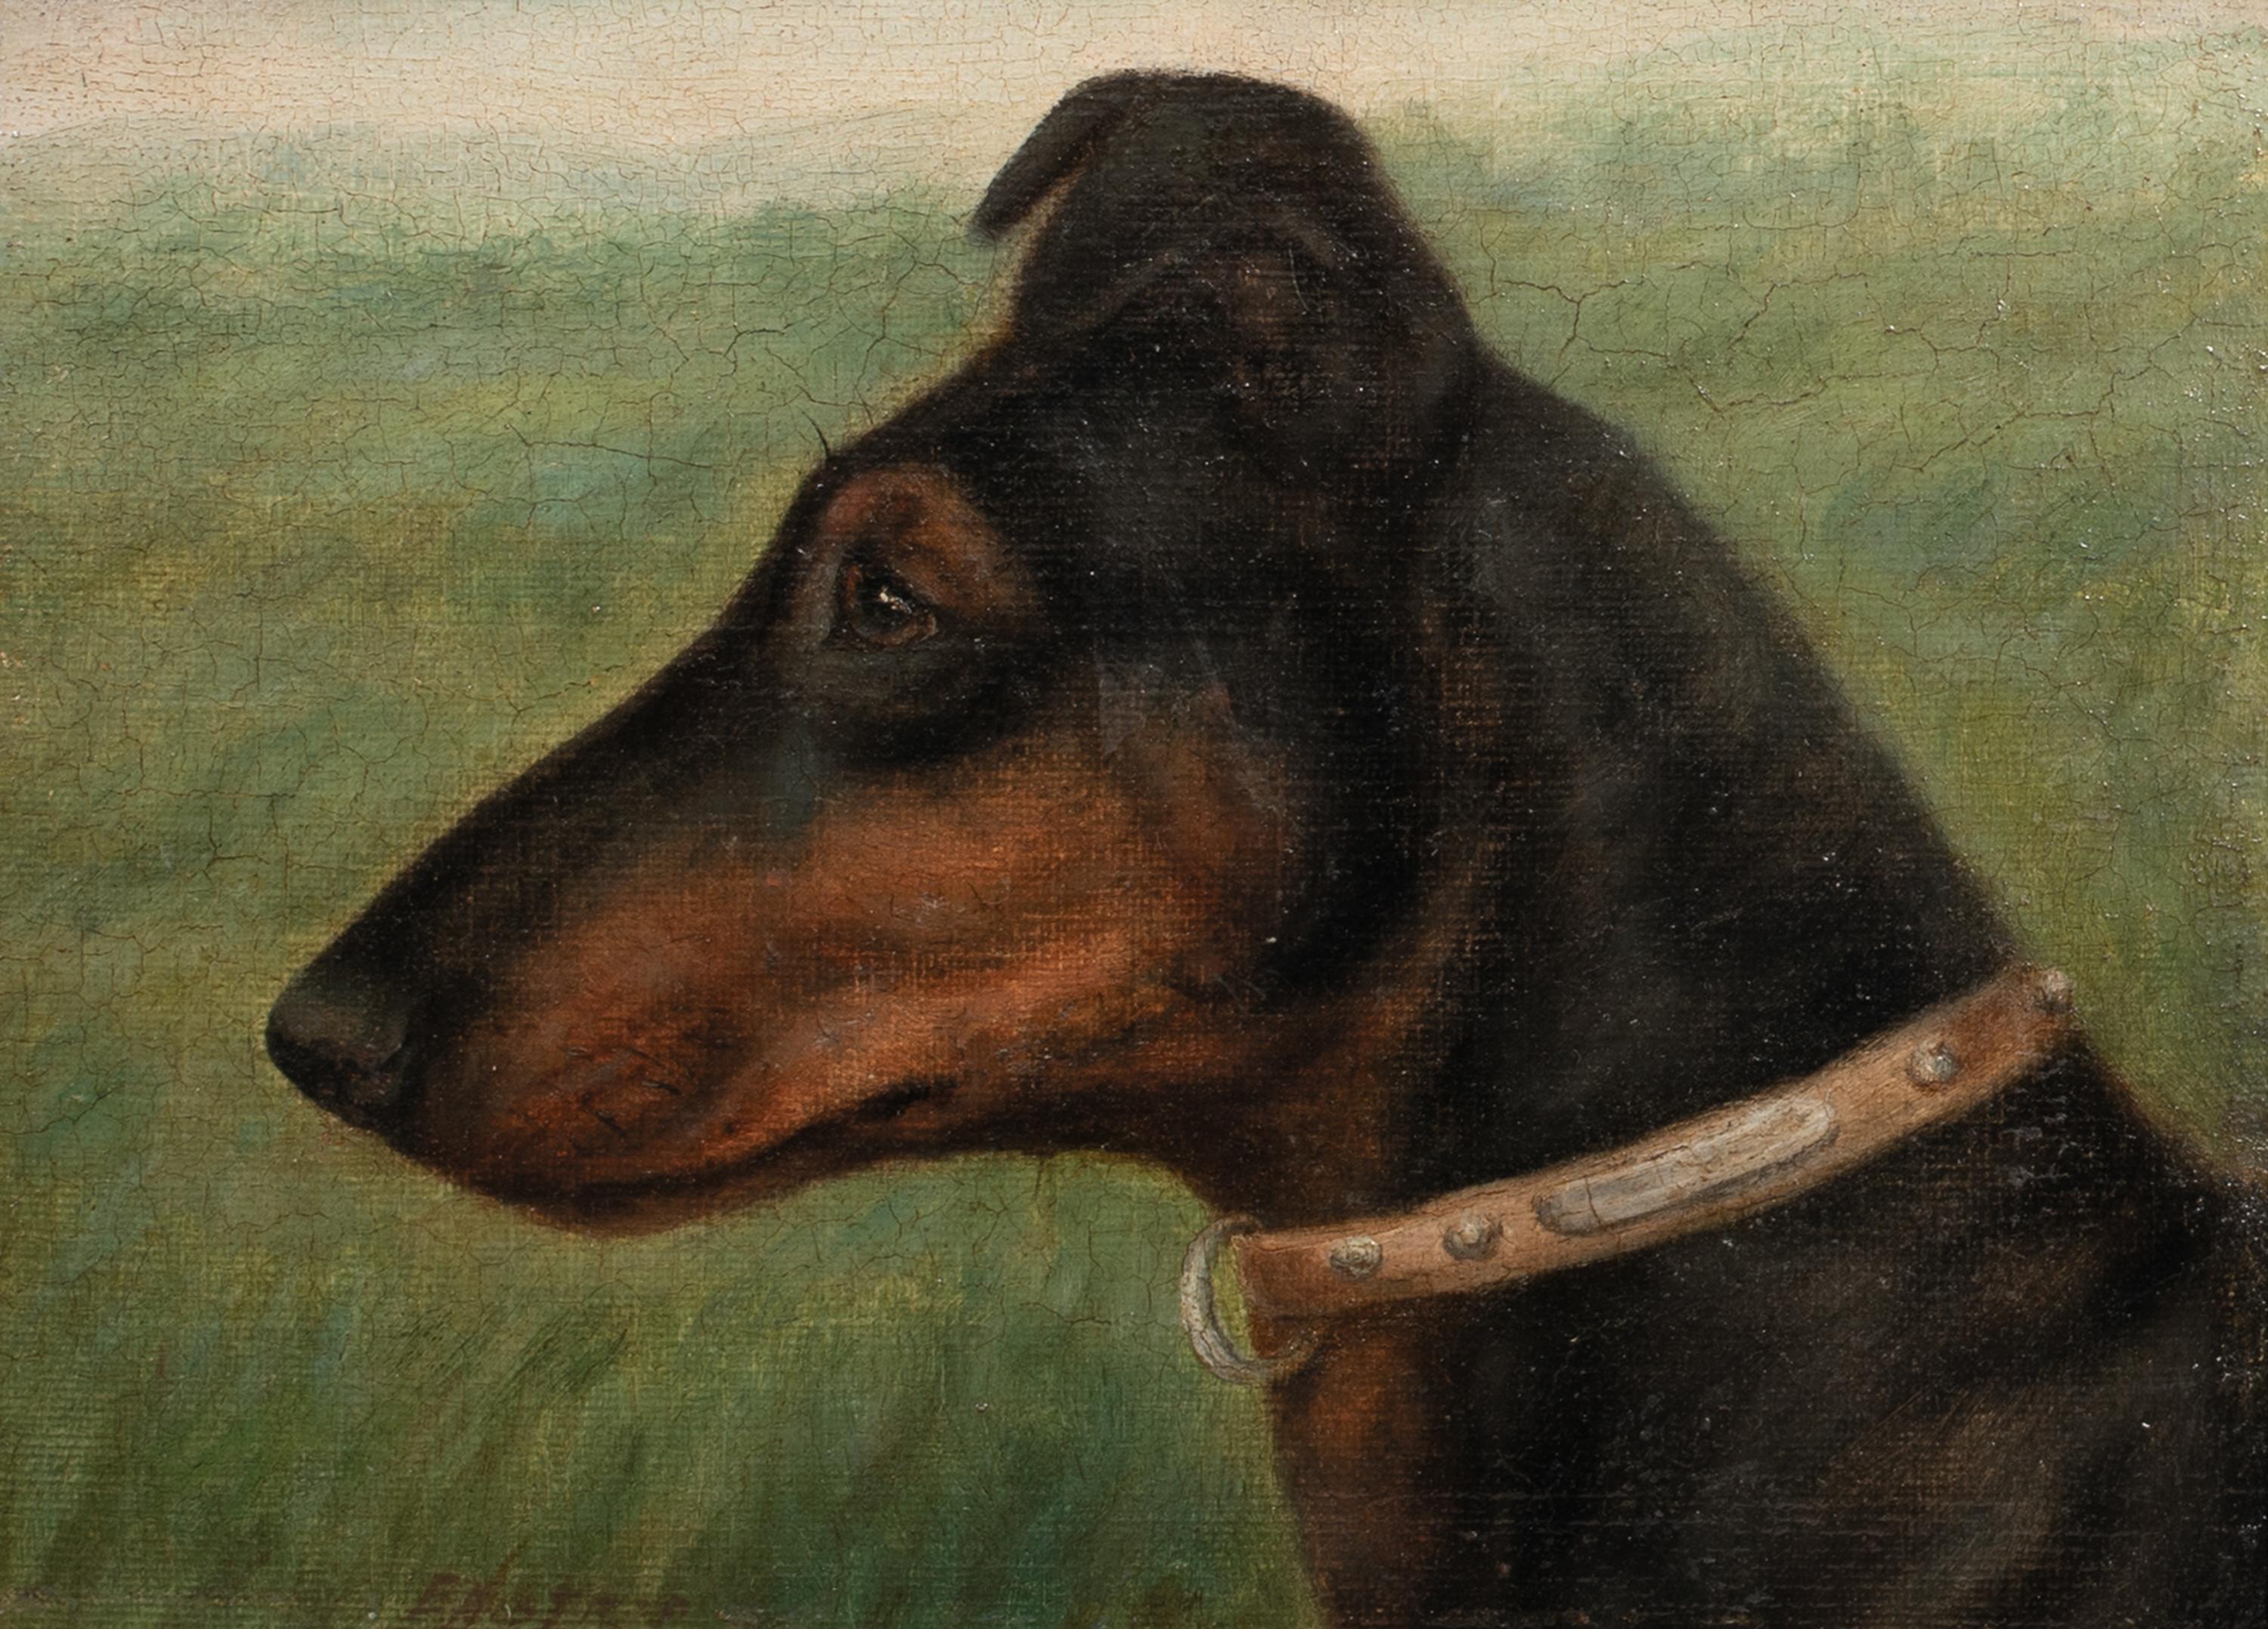 Portrait Of A German Pinscher, 19th Century

EDWARD AISTROP (1880-1920)

Circa 1900 portrait of the head of a German Pinscher, oil on board by Edward Airstrip. Important early depiction of the breed capturing the side profile of the dog with a field